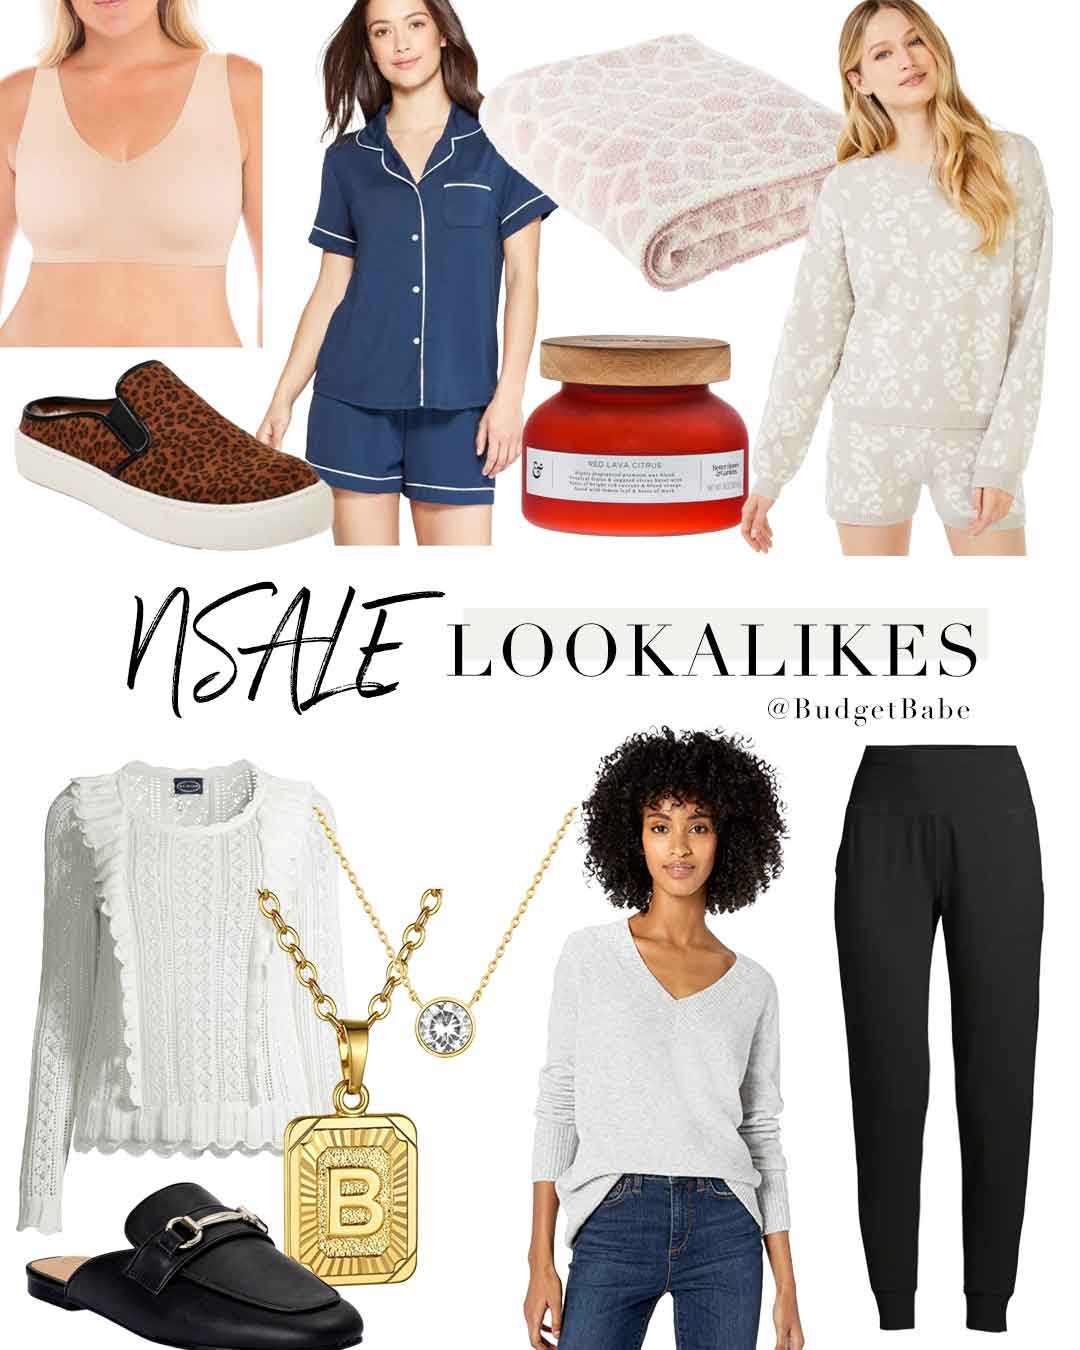 Nordstrom Anniversary Sale 2021 Preview is live, but you can shop these lookalikes right now!